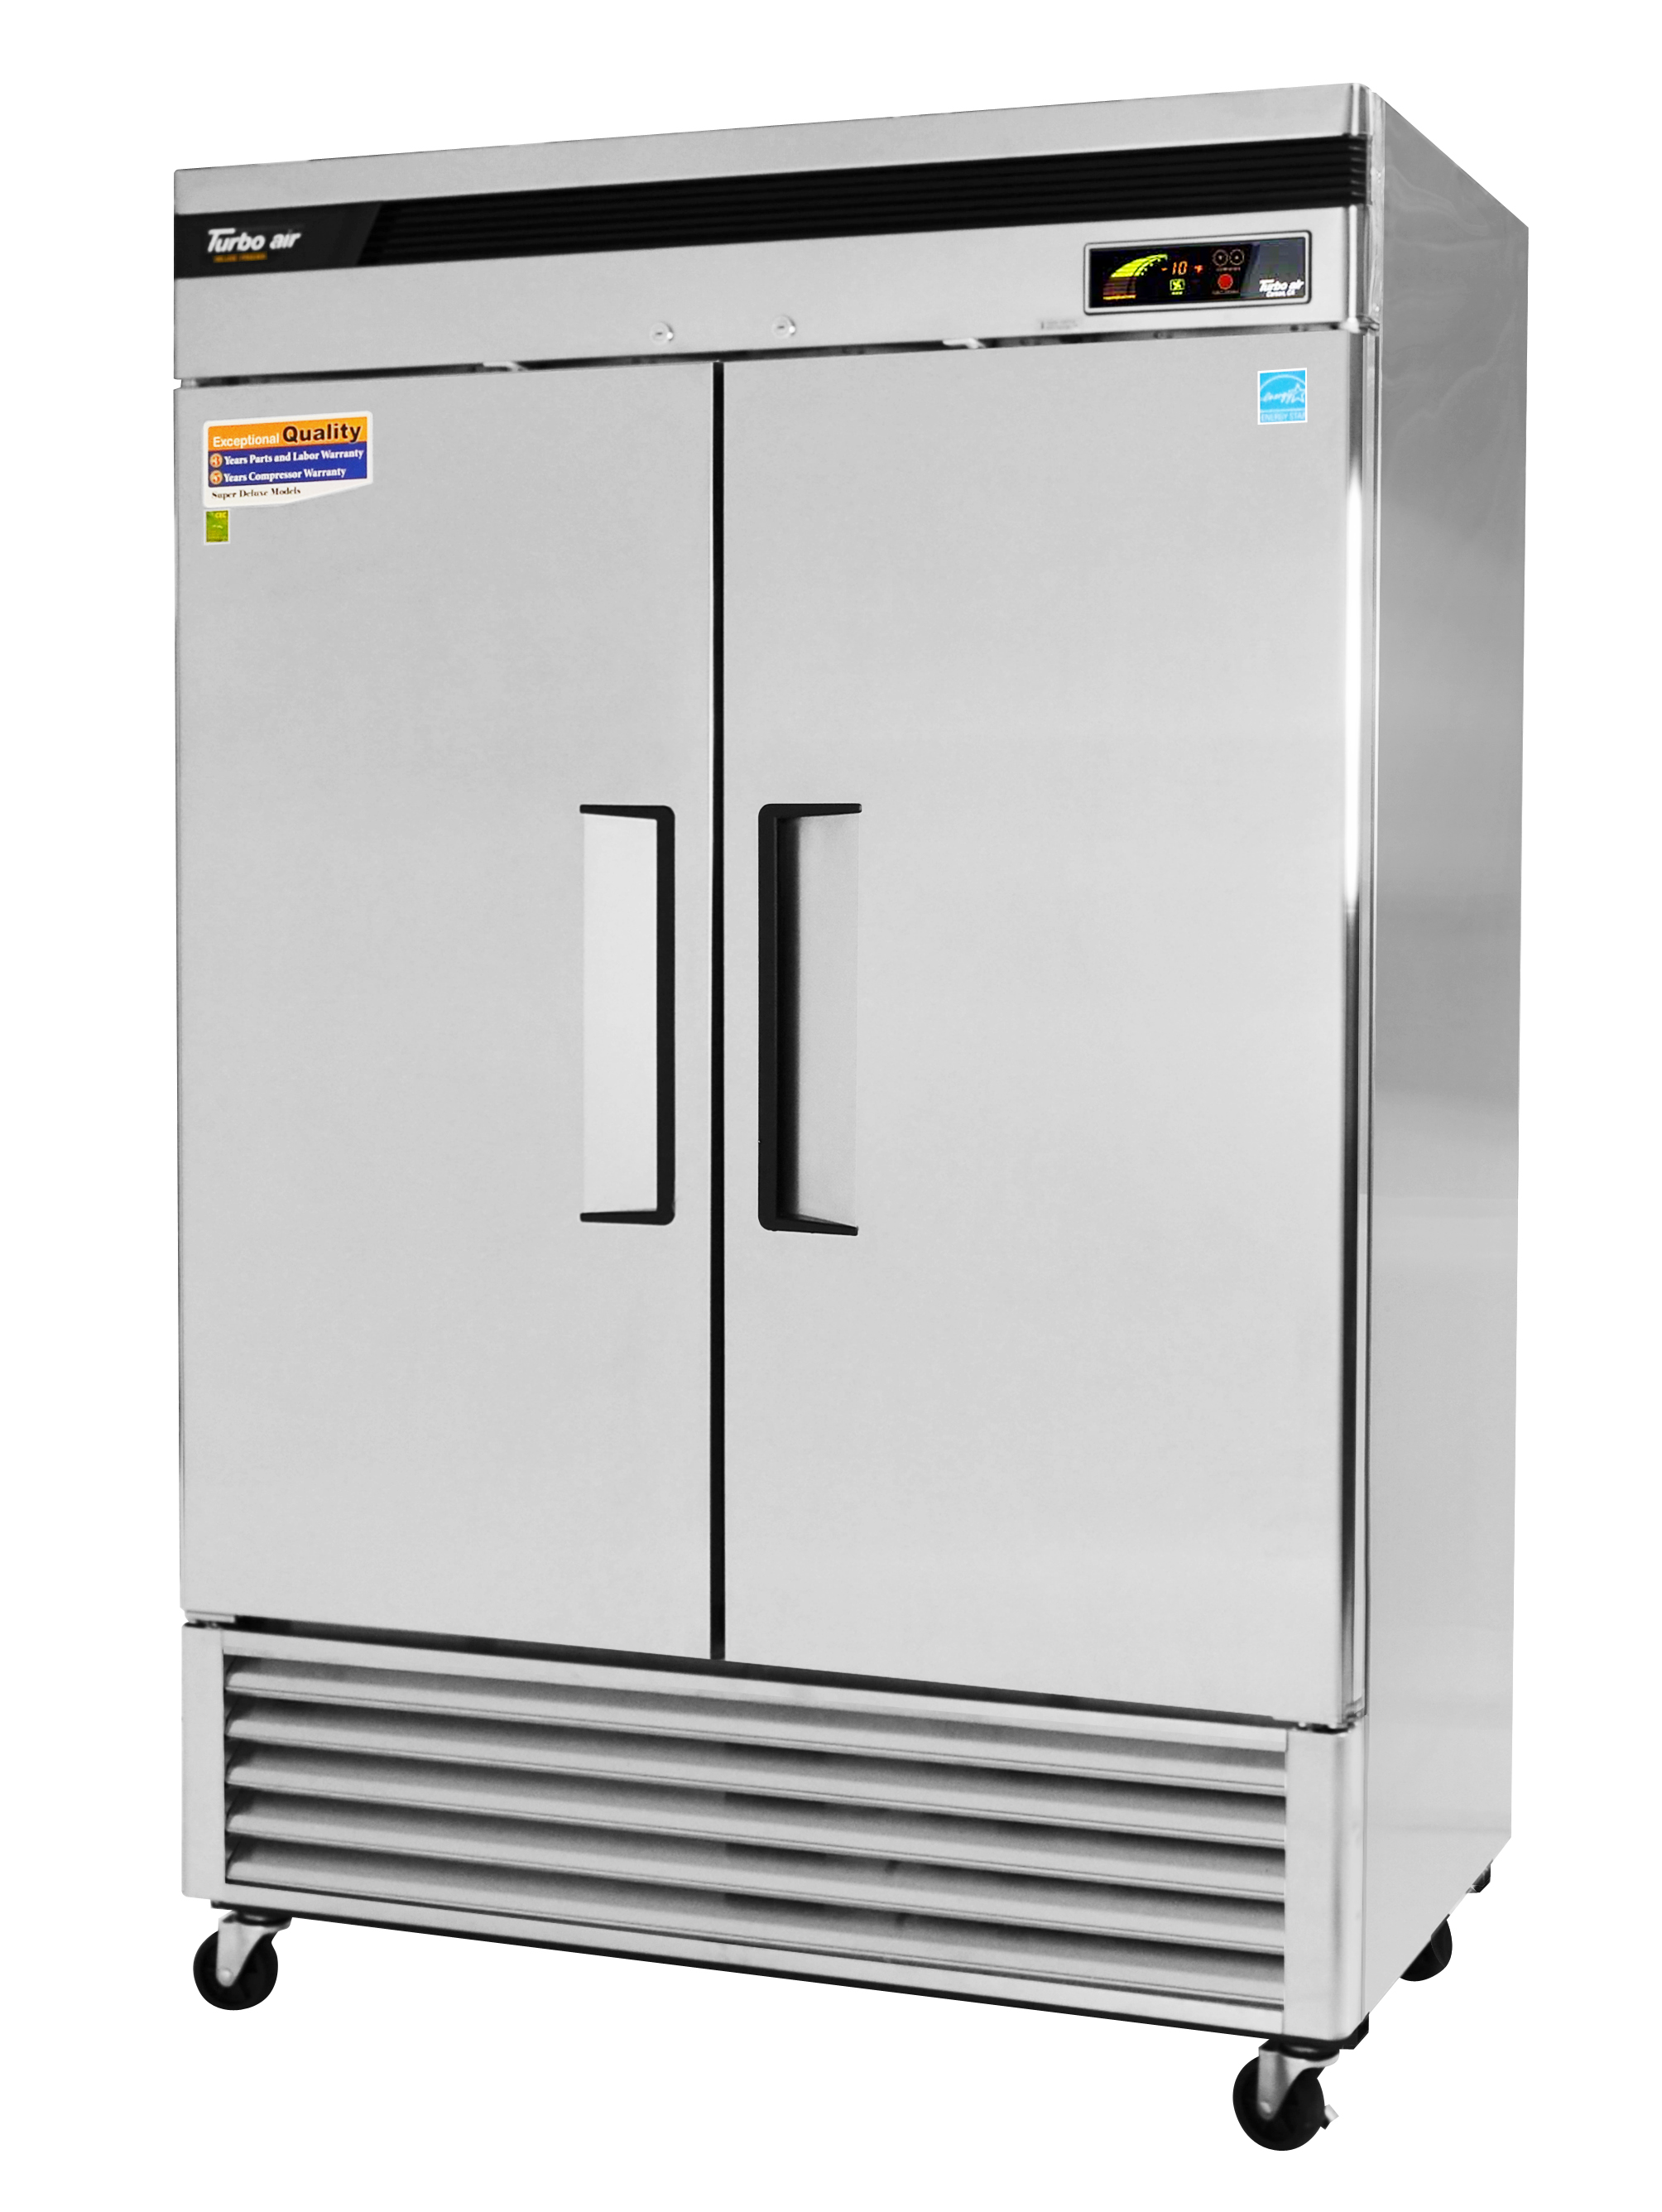 Super Deluxe Freezer, reach-in, two-section, 49 cu. ft